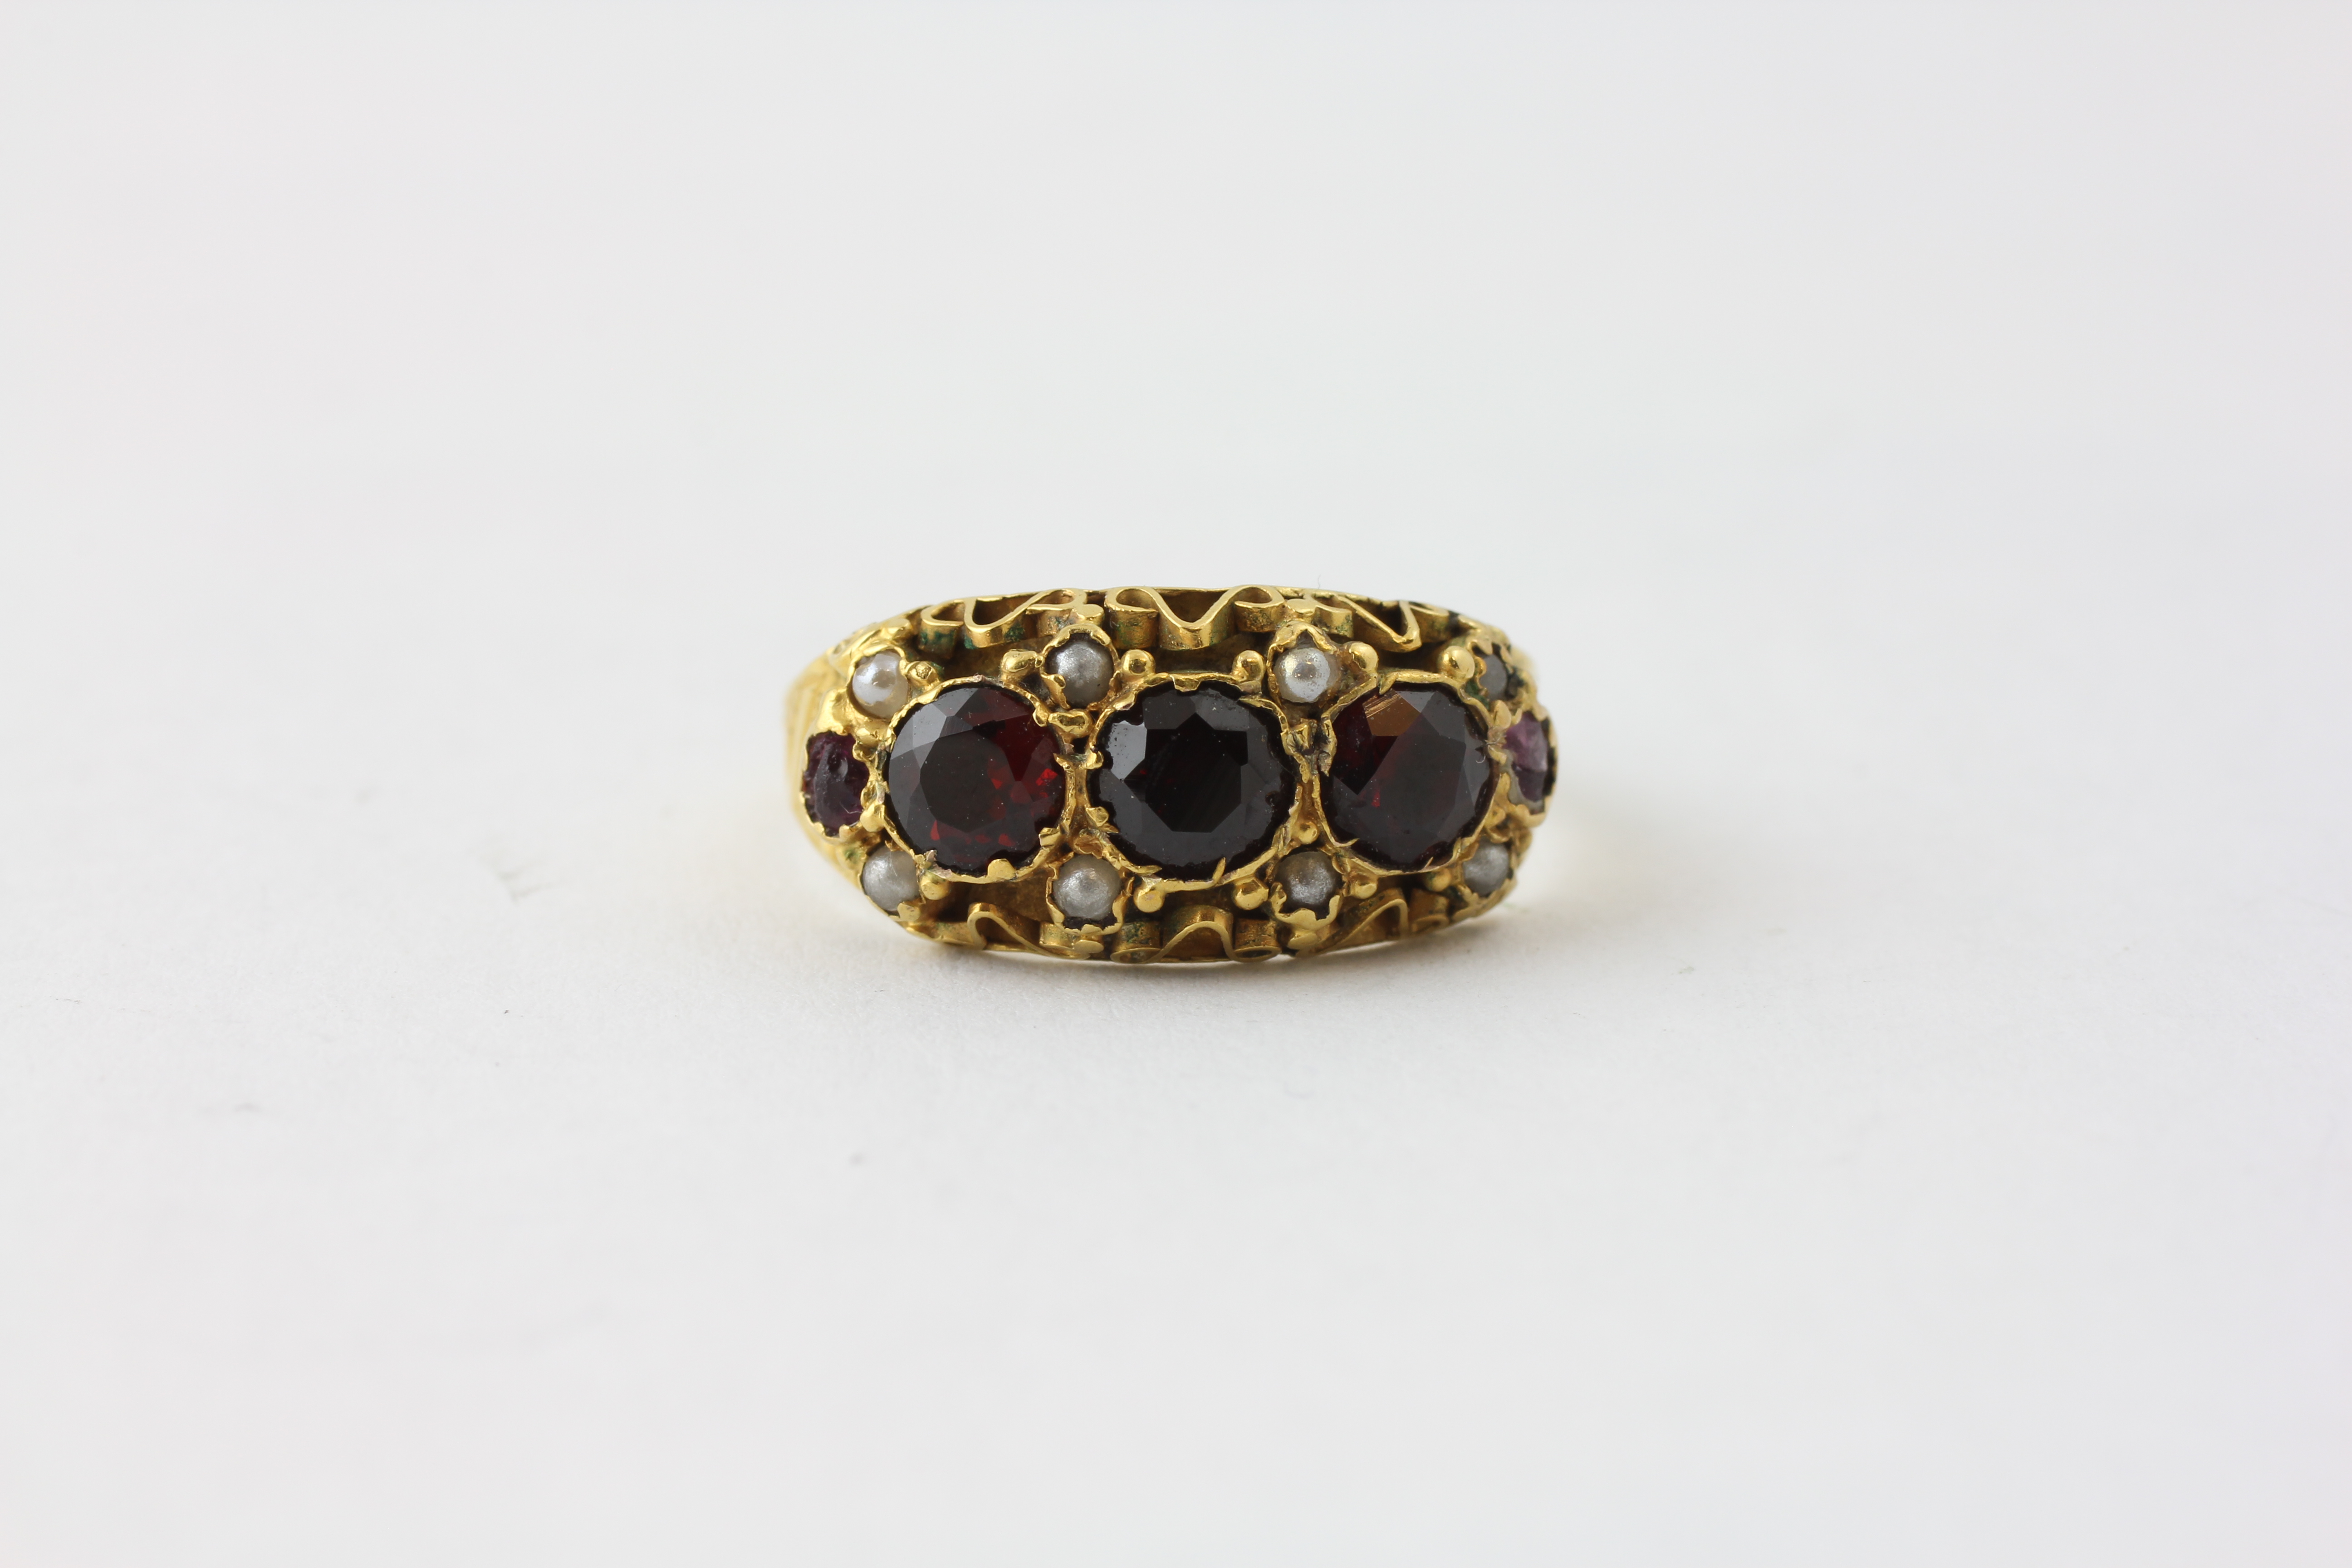 A THREE STONE GARNET, SEED PEARL AND AMETHYST RING (VERY WORN CONDITION), PROBABLY SET IN 15CT GOLD,